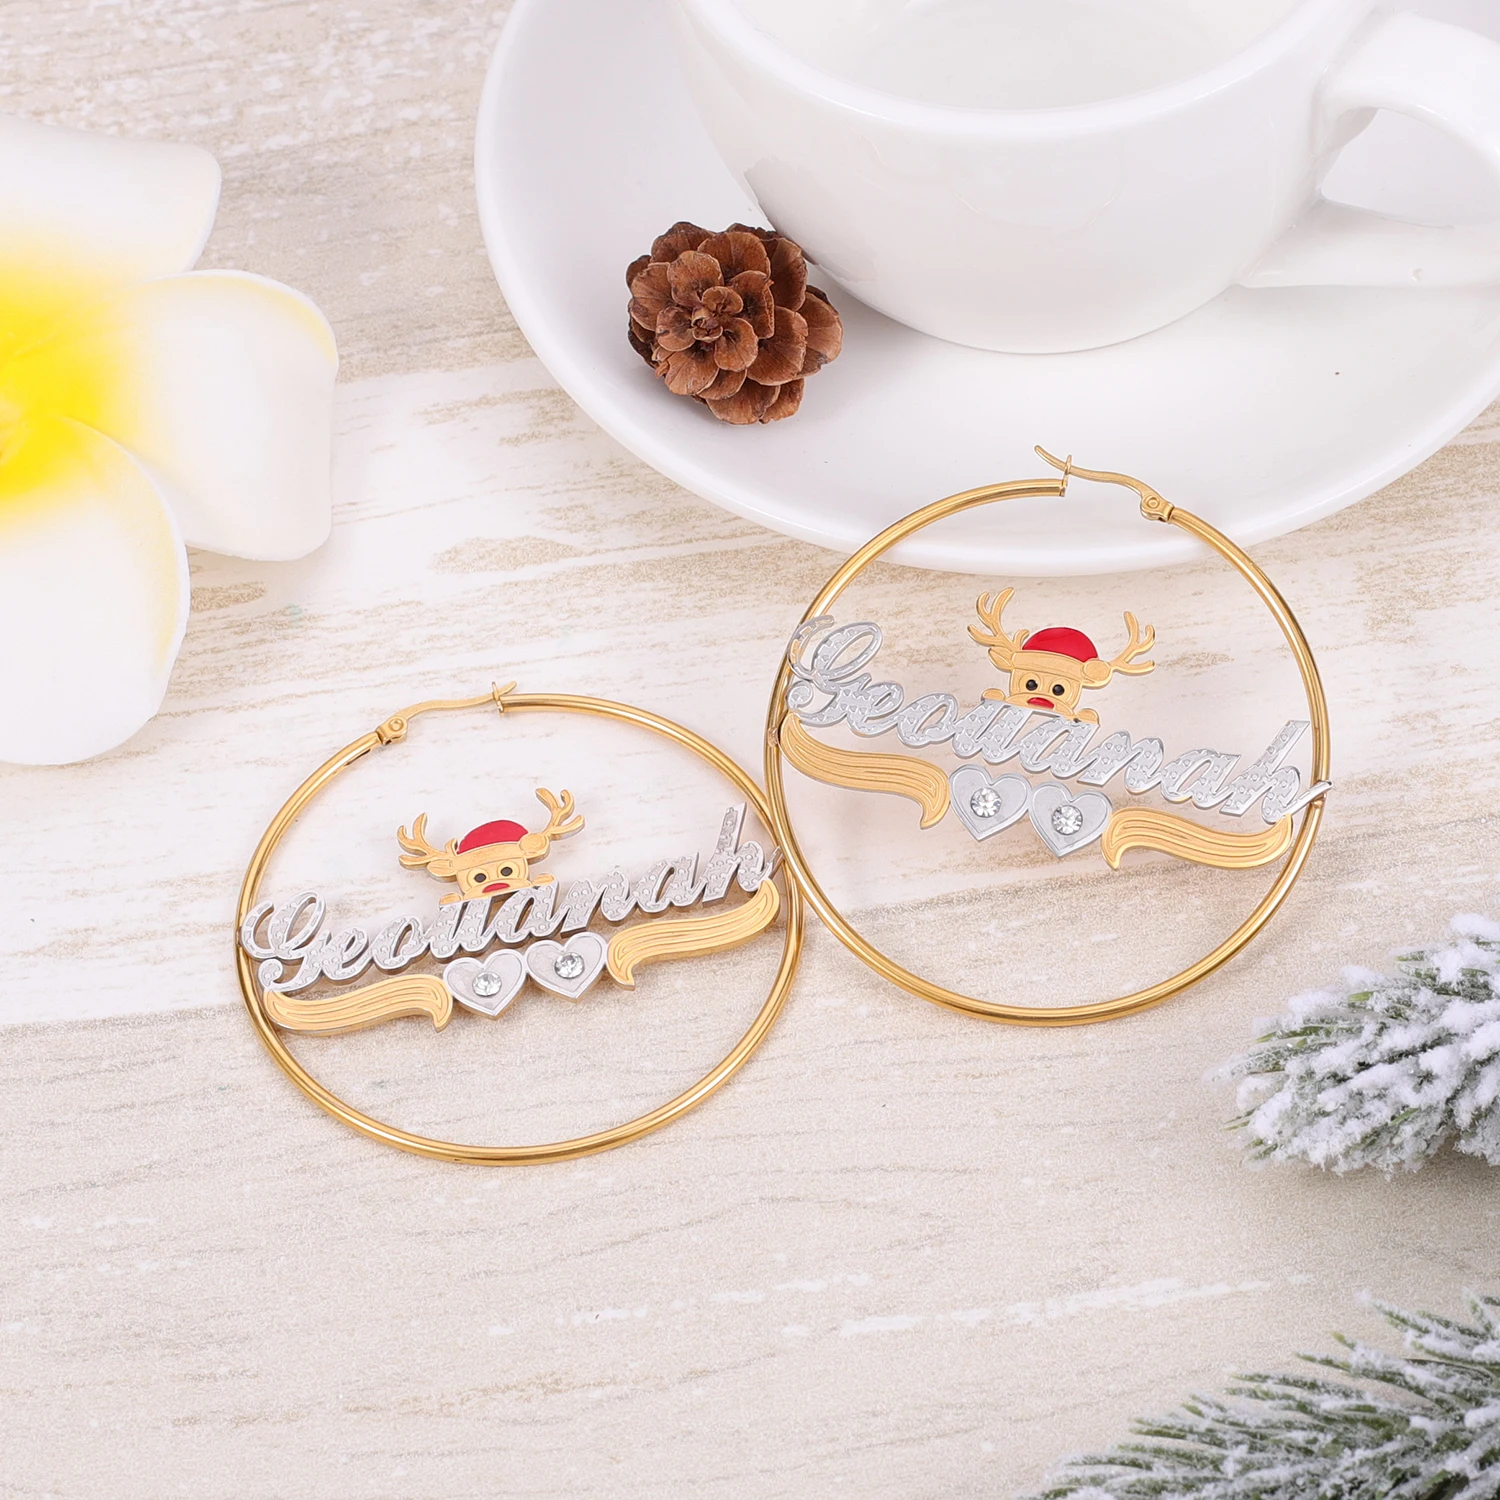 New Christmas Gifts Customized Name Earrings Two Tone 18K Gold Plated Snowman Personalized Hoop Name Earrings for Women Girls earrings christmas tree rhinestone alloy earrings in silver size one size